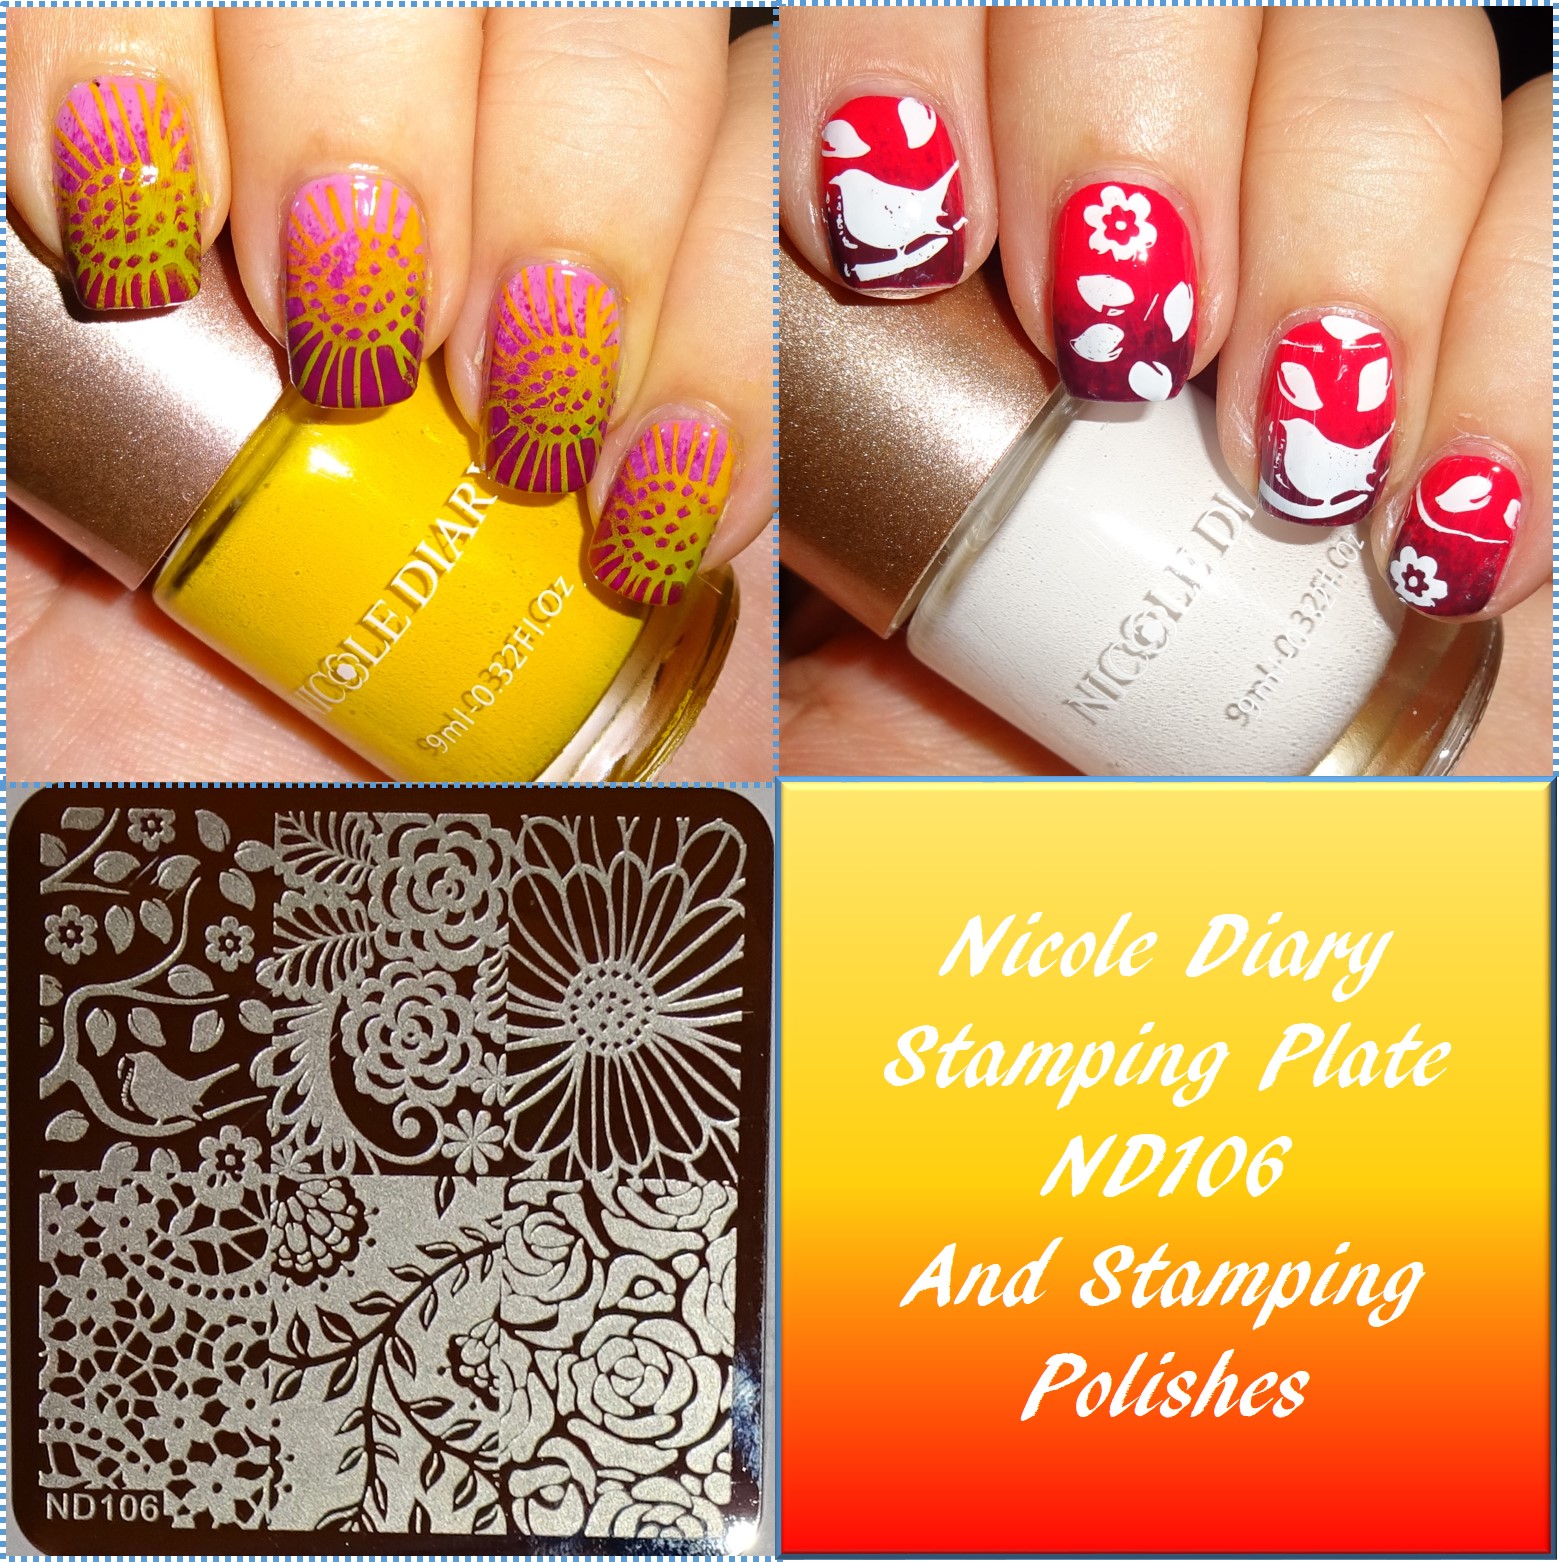 Wendy's Delights: Nicole Diary Stamping Polishes and Stamping Plate ND106